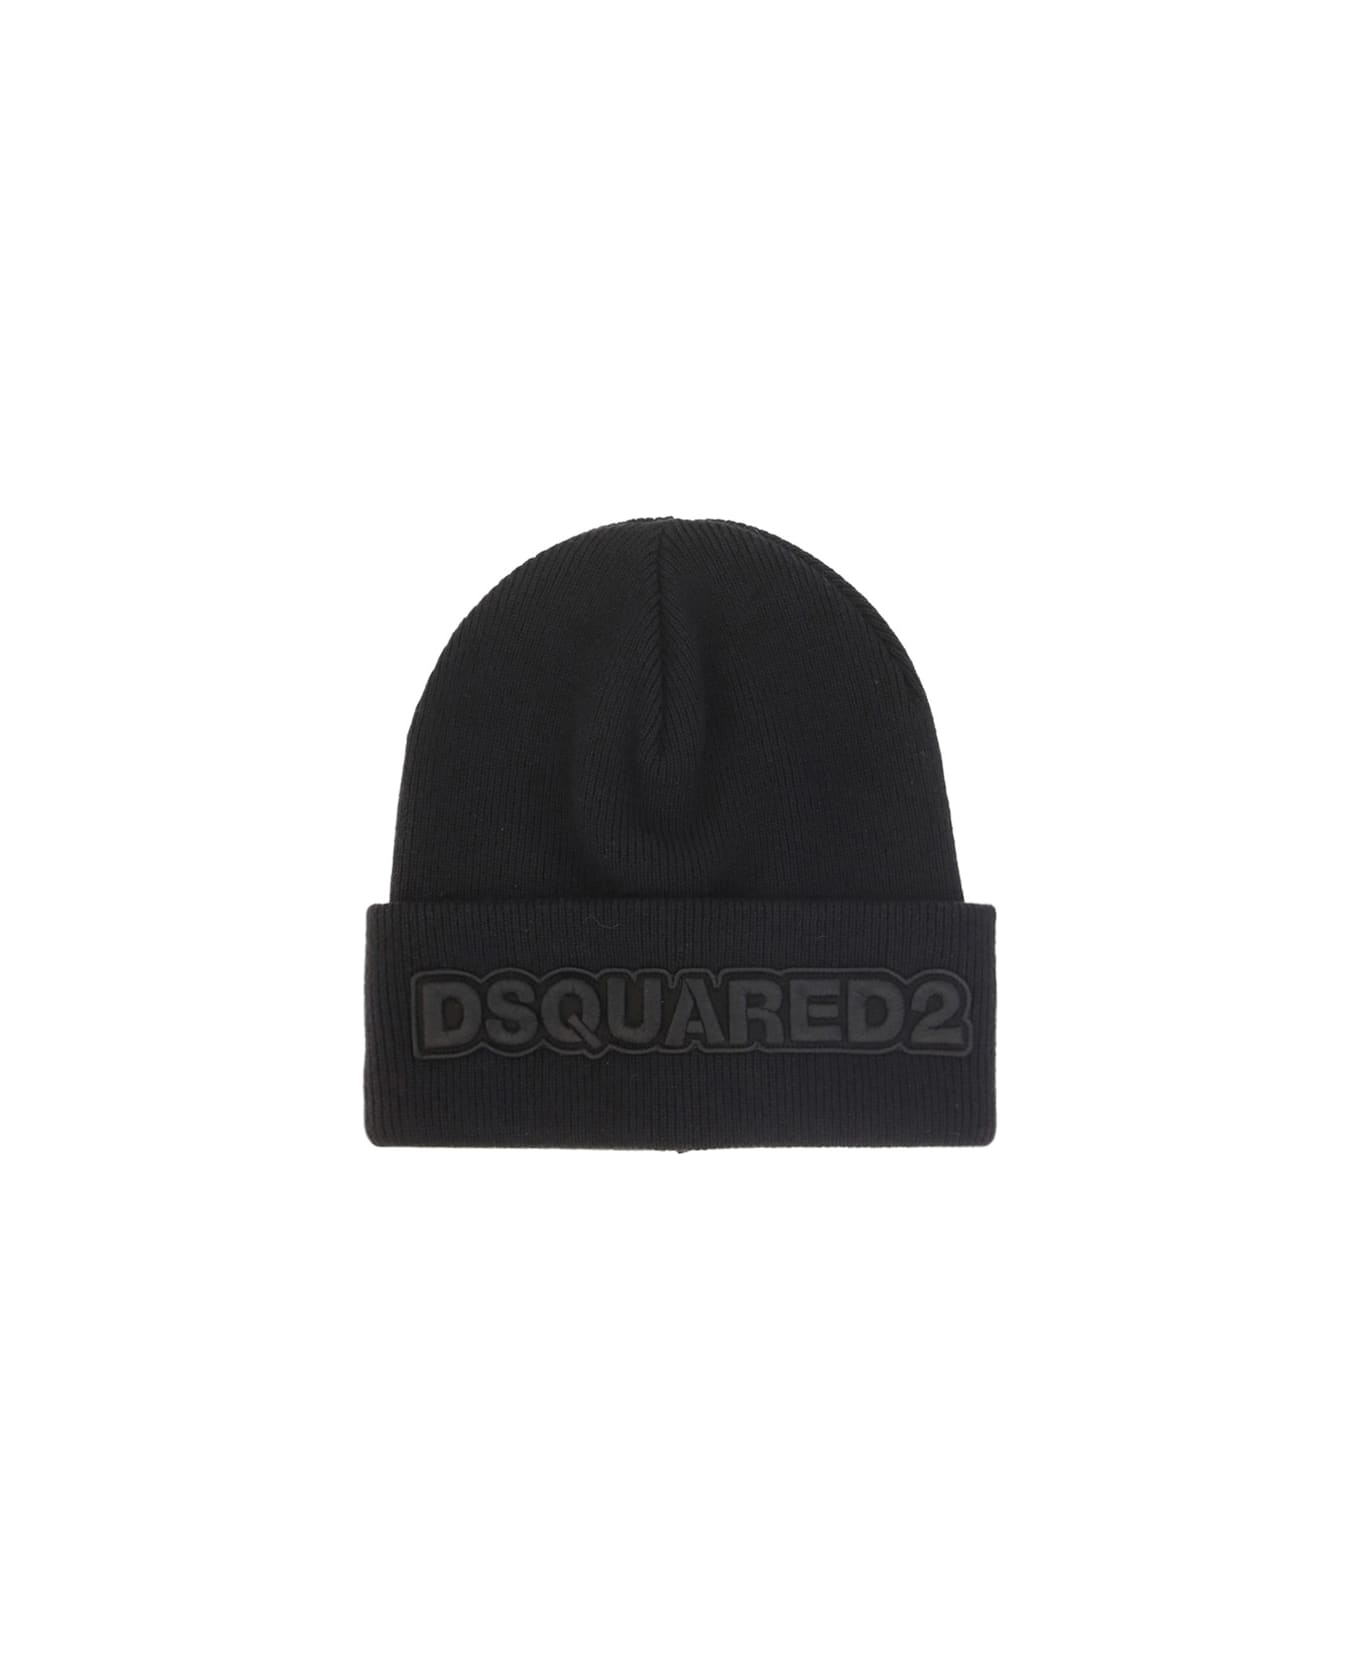 Dsquared2 Logo Embroidered Knit Beanie - M084 帽子